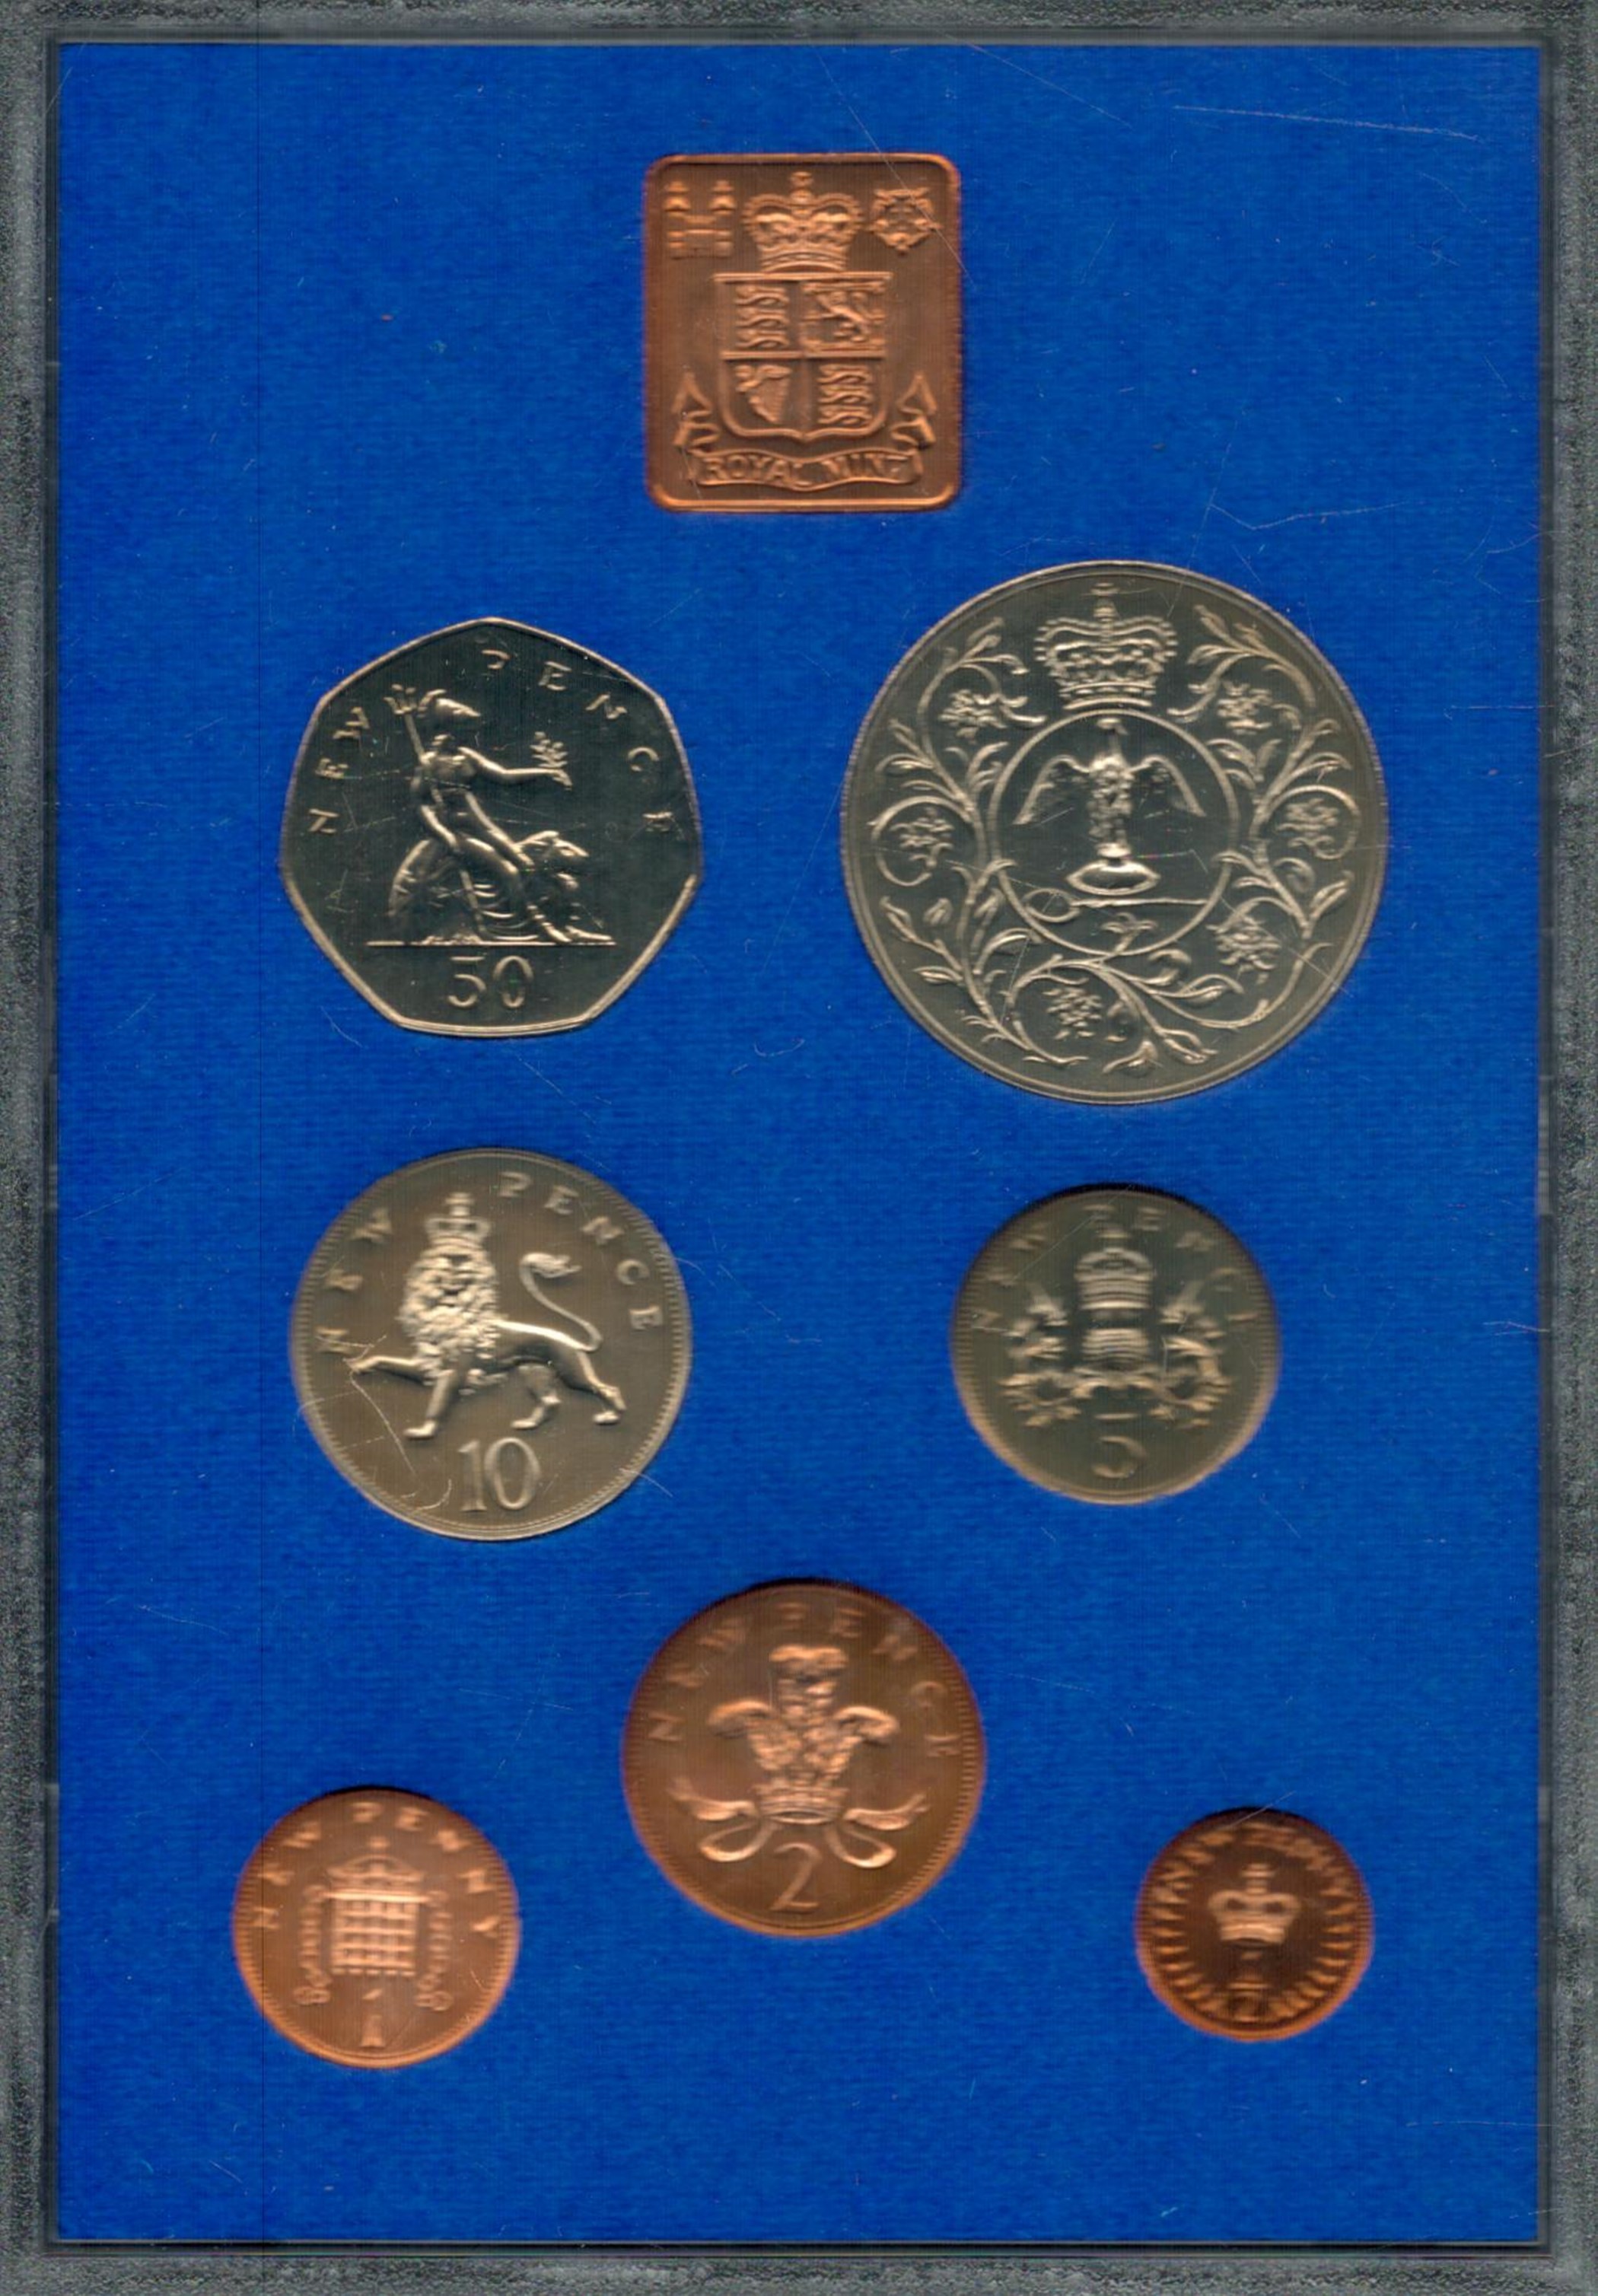 Coinage of Great Britain and Northern Ireland 1977 Proof Set in Display Case and Wallet from The - Image 2 of 3